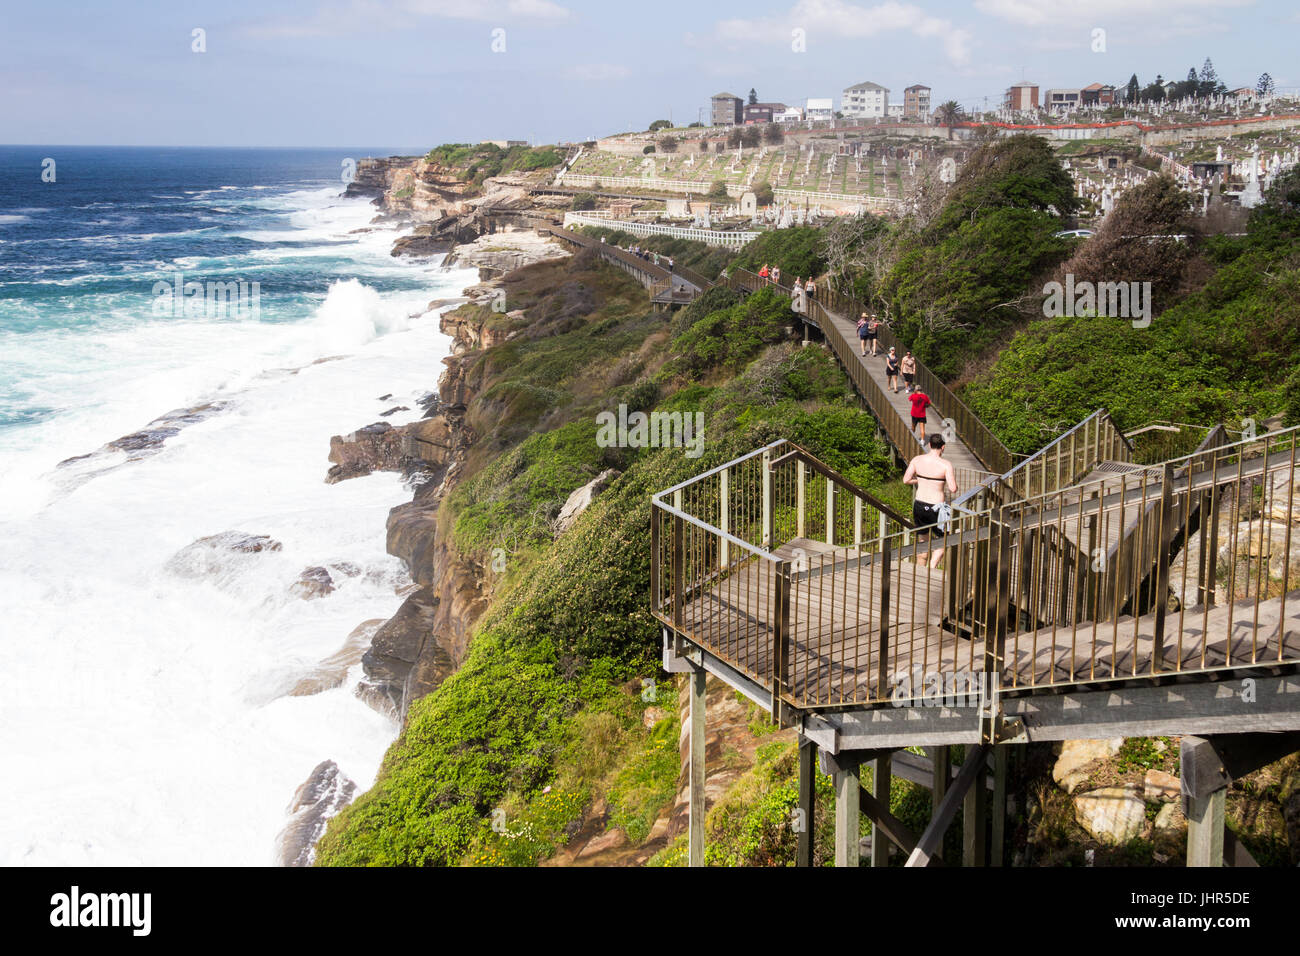 The Bondi to Coogee coastal walk with rough seas and Waerley cemetery in the background, Sydney, New South Wales, Australia, Stock Photo